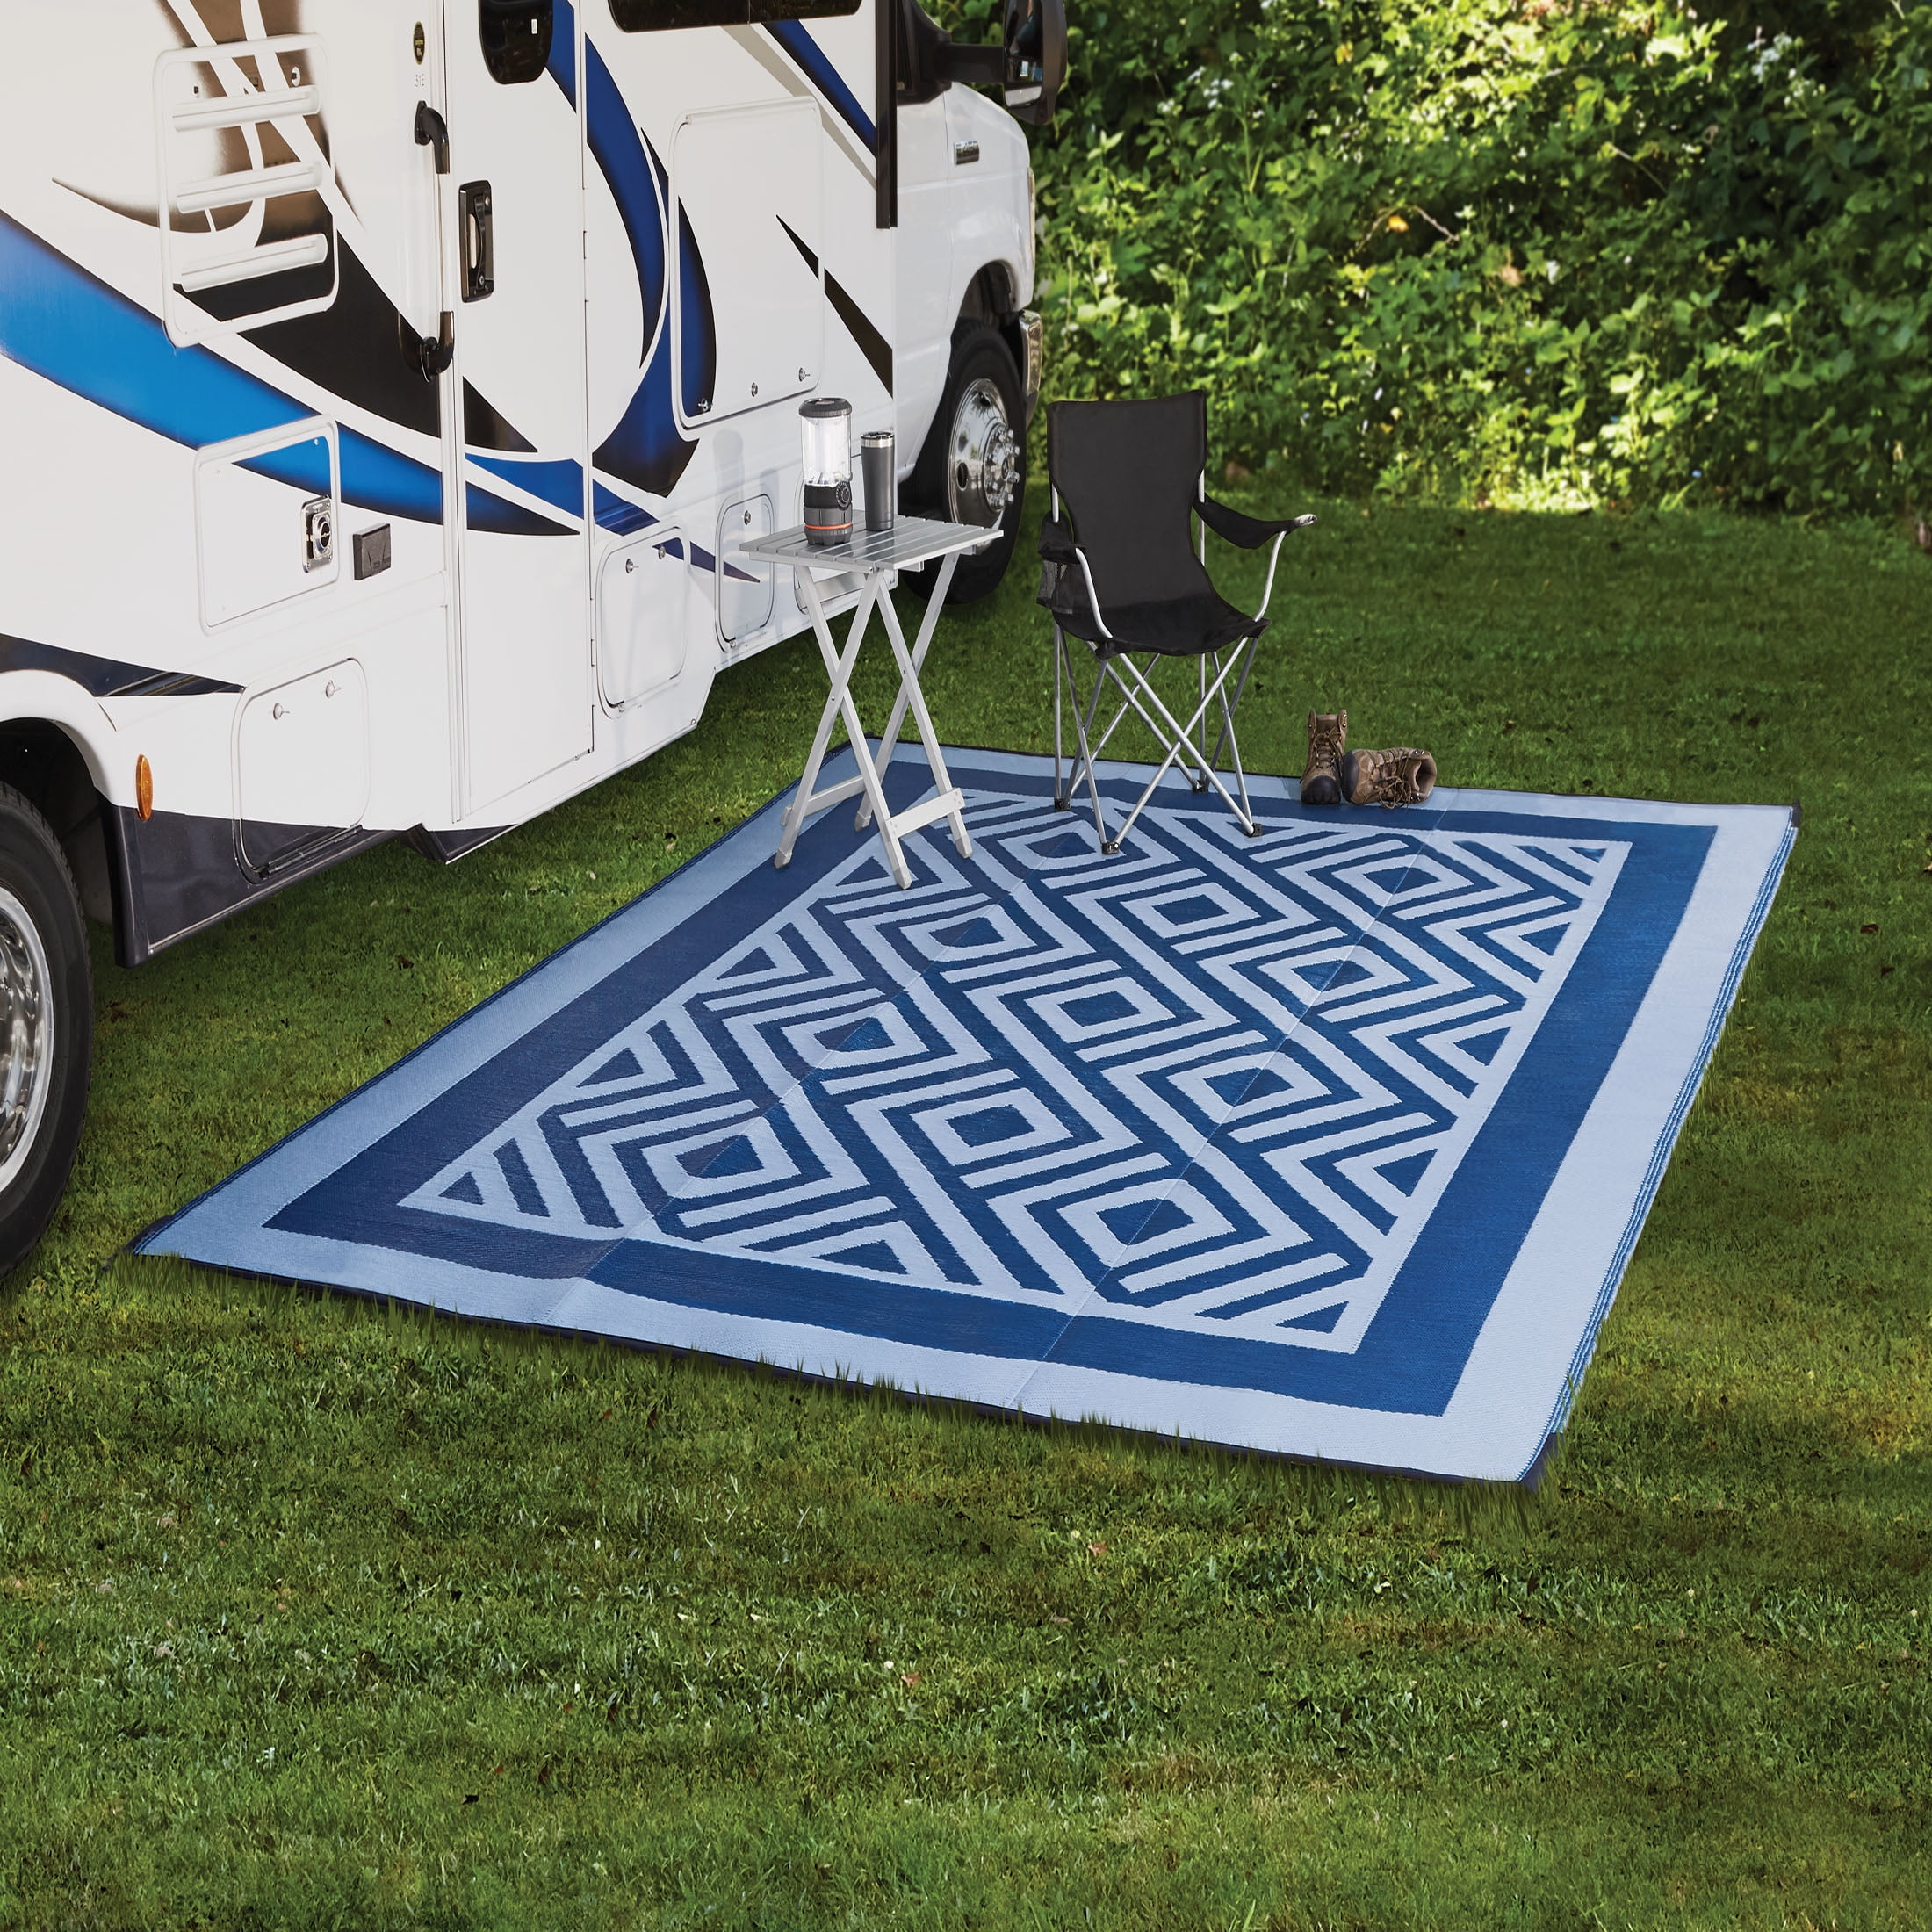 Mountain Mat Earth-Friendly Outdoor RV Patio mat Size 8' x 12' & 8' x 16'  for Campers, Campsites - Premium 5 mm Thick Heavy Duty, Waterproof,  Reversible Rugs Re…